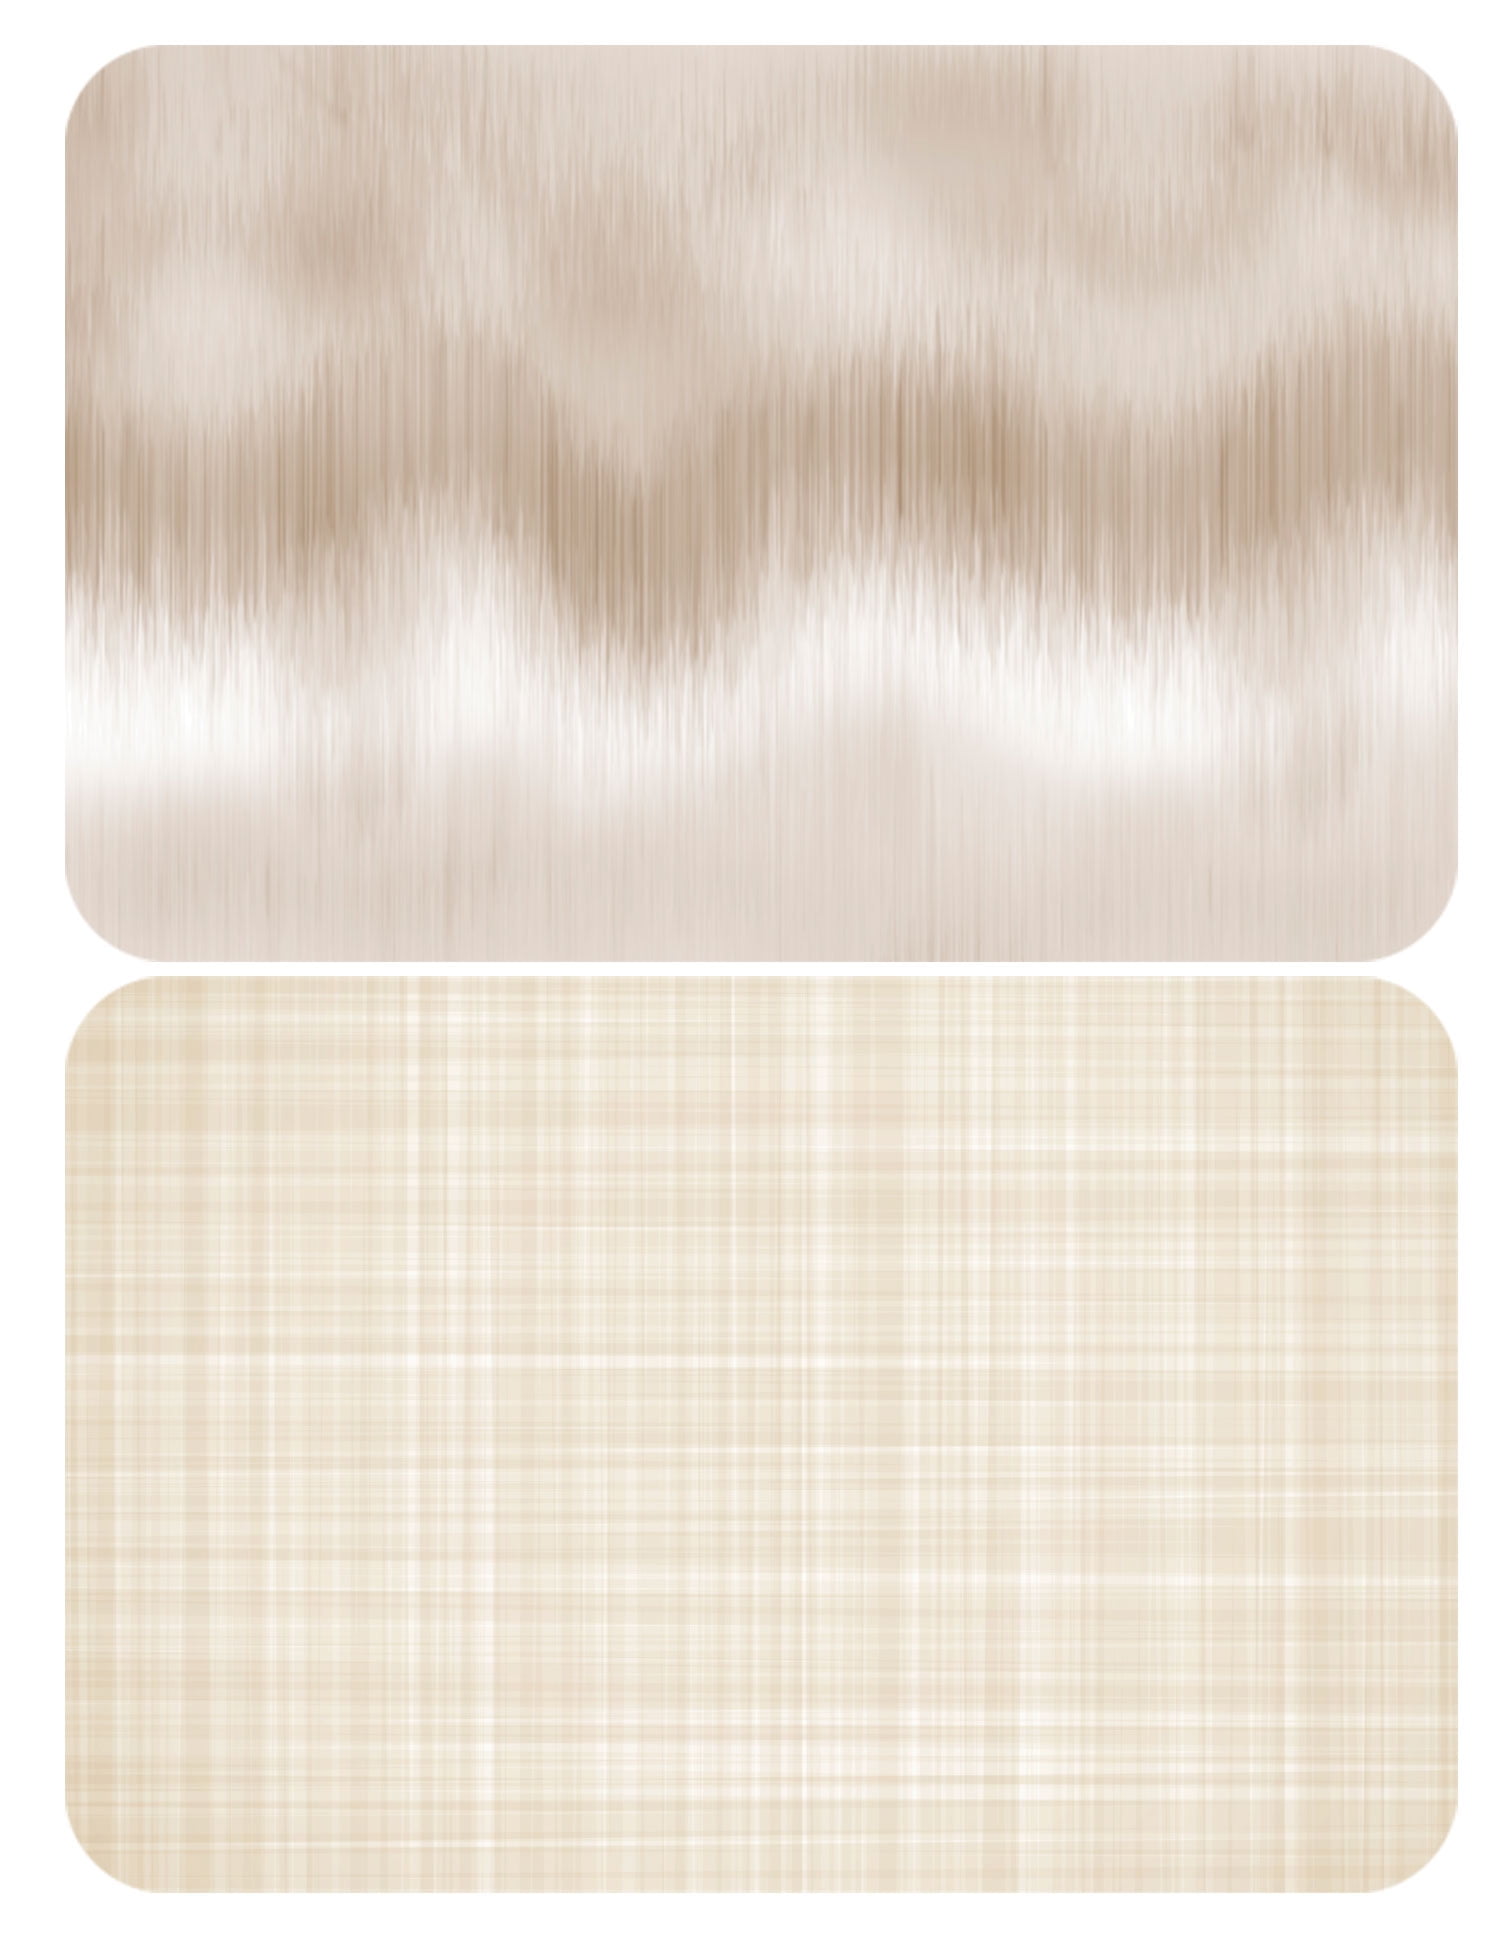 Ombre Texture, Reversible Individual Table Placemat, 17.13" x 11.25"